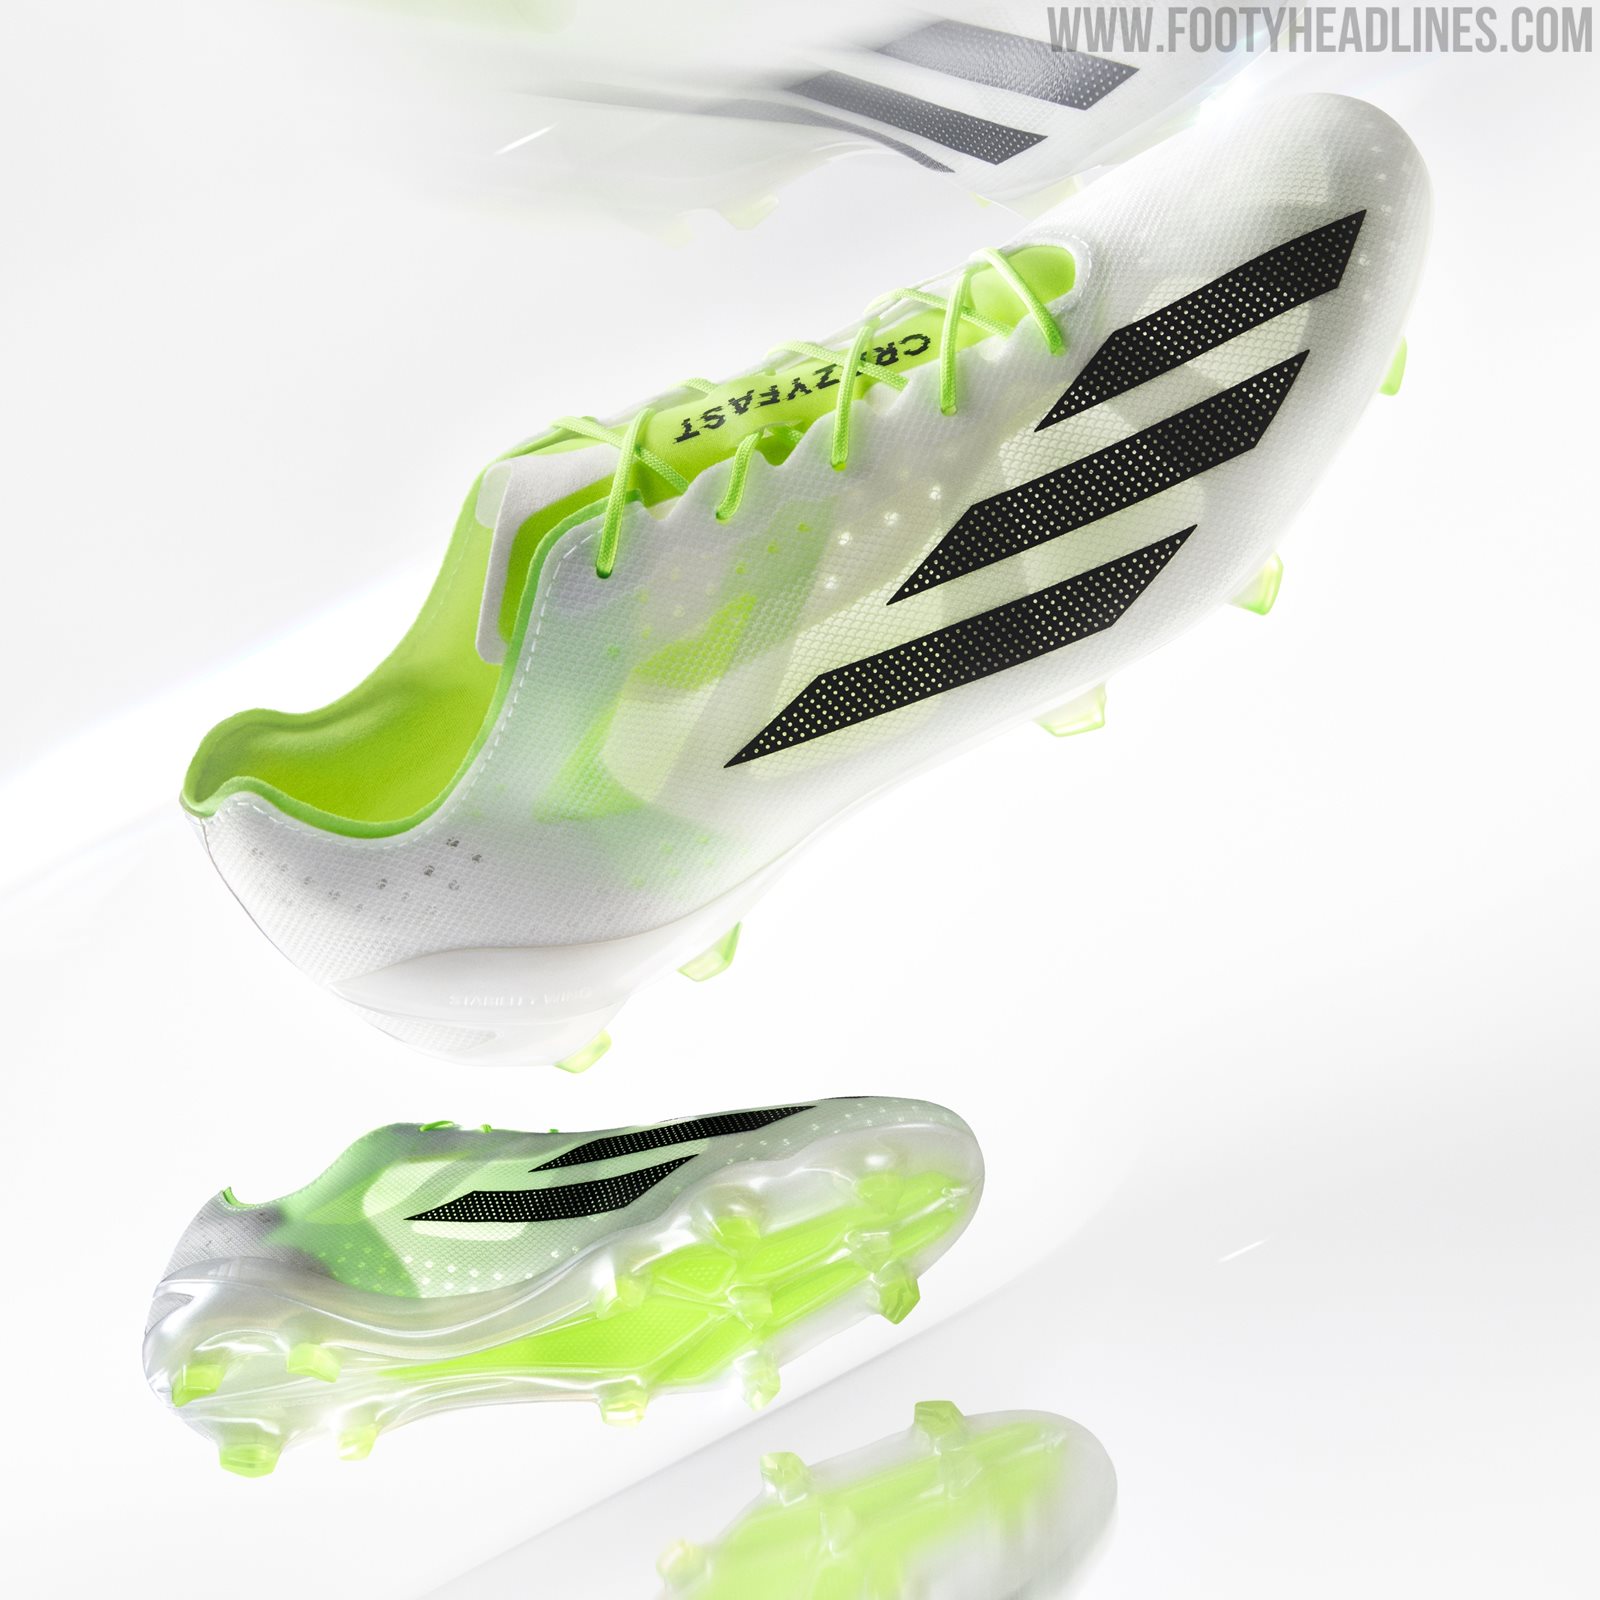 Next-Gen Adidas X Crazyfast Boots Released - Available in 3